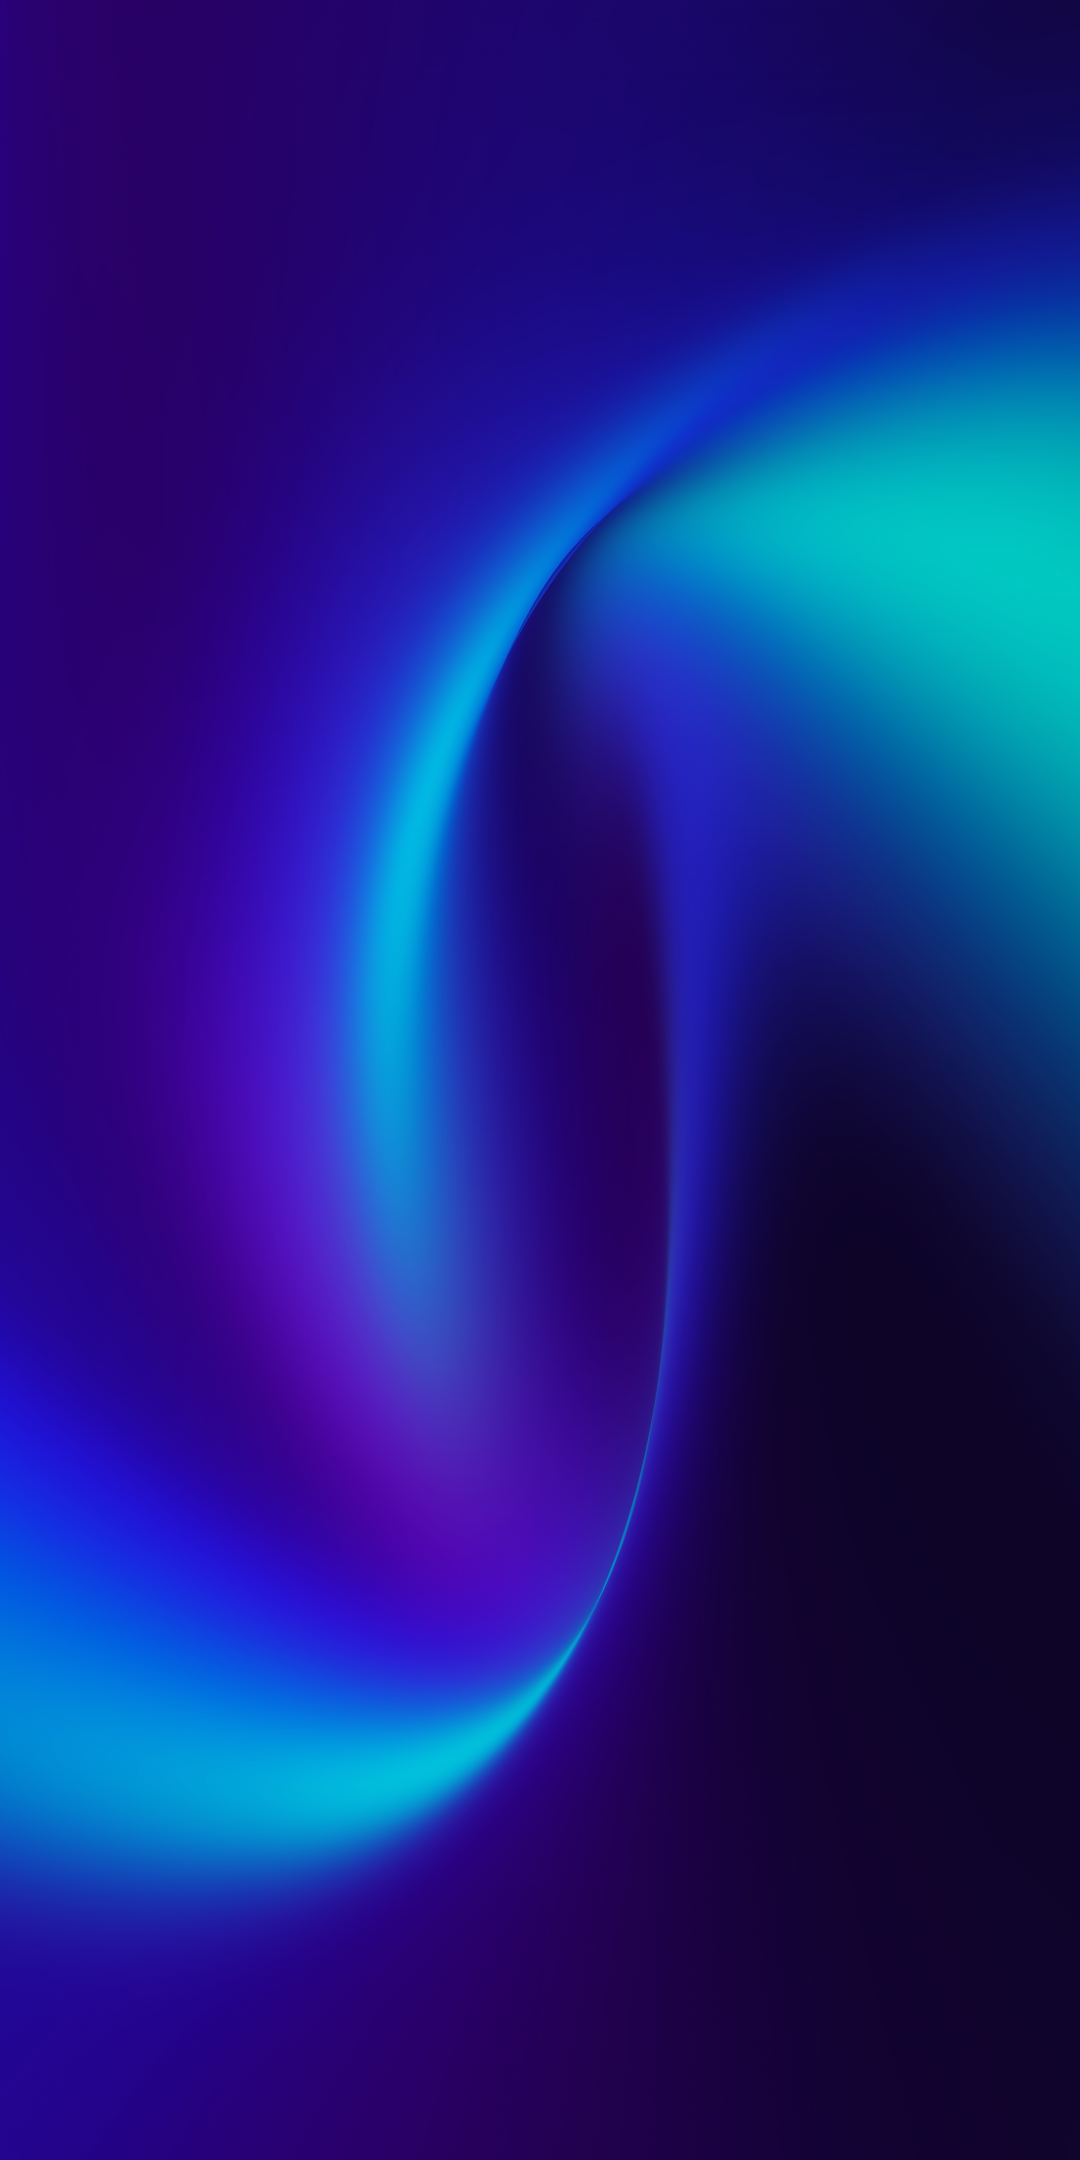 Blue circular gradient by Ongliong11 | Zollotech